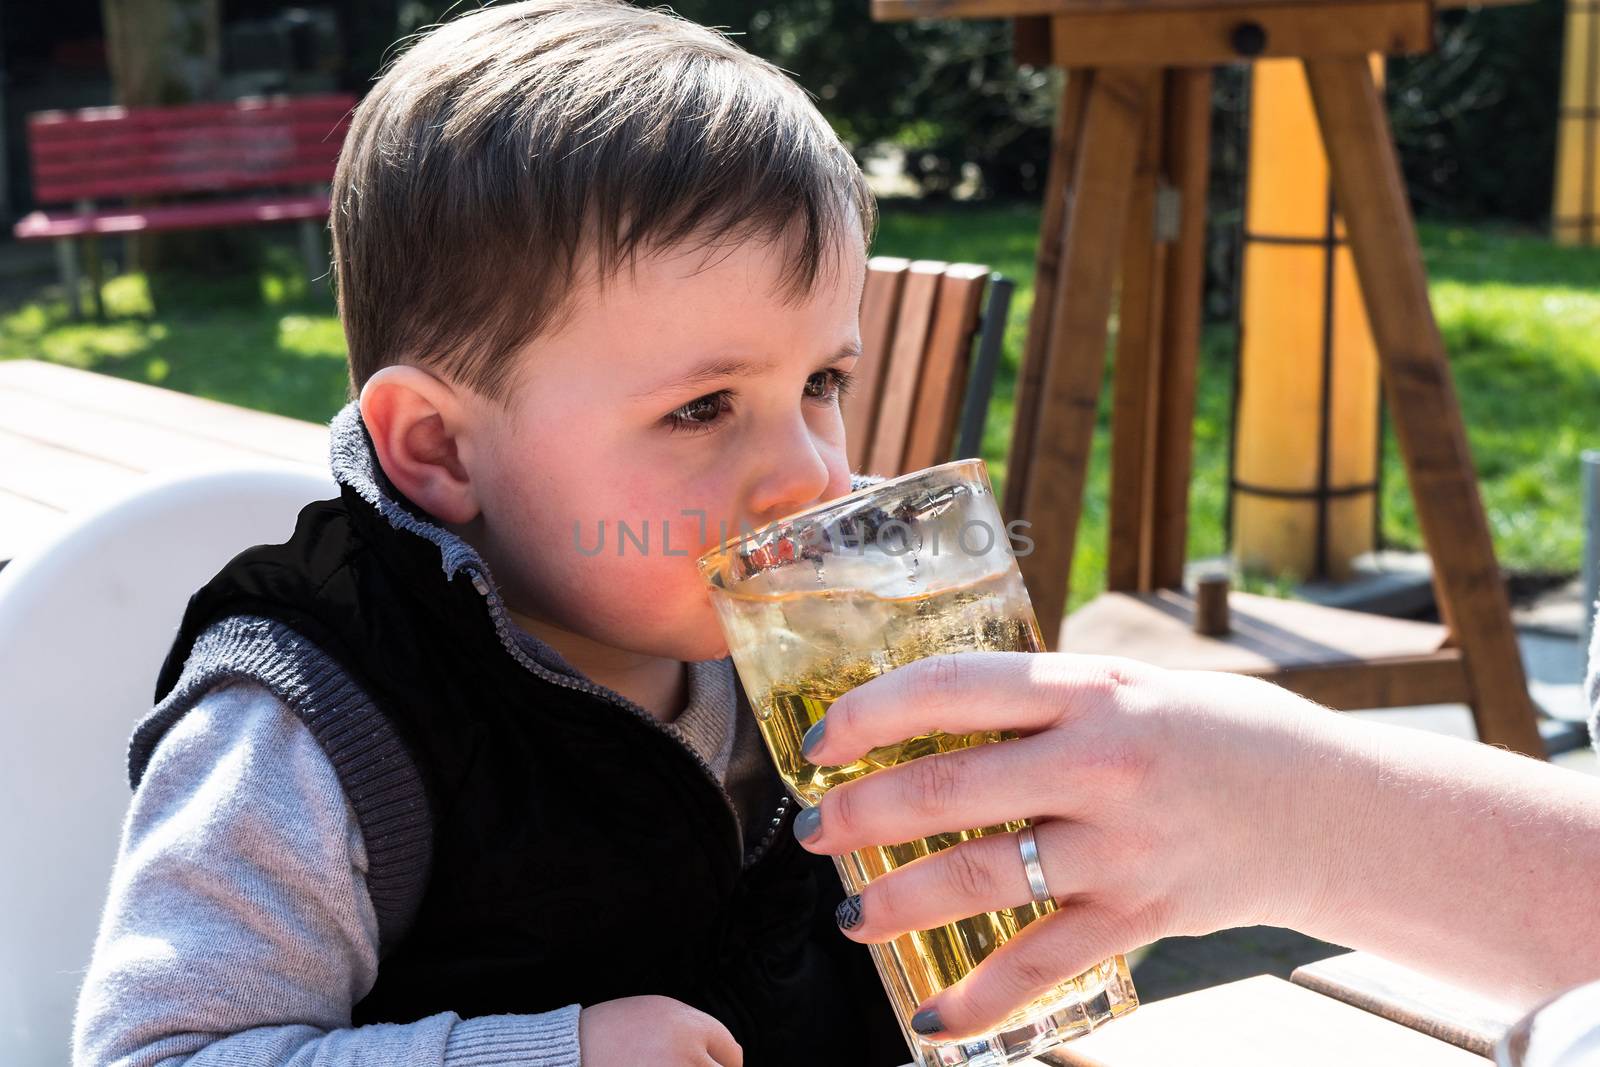 Child drinks juice from a glass in a garden restaurant.